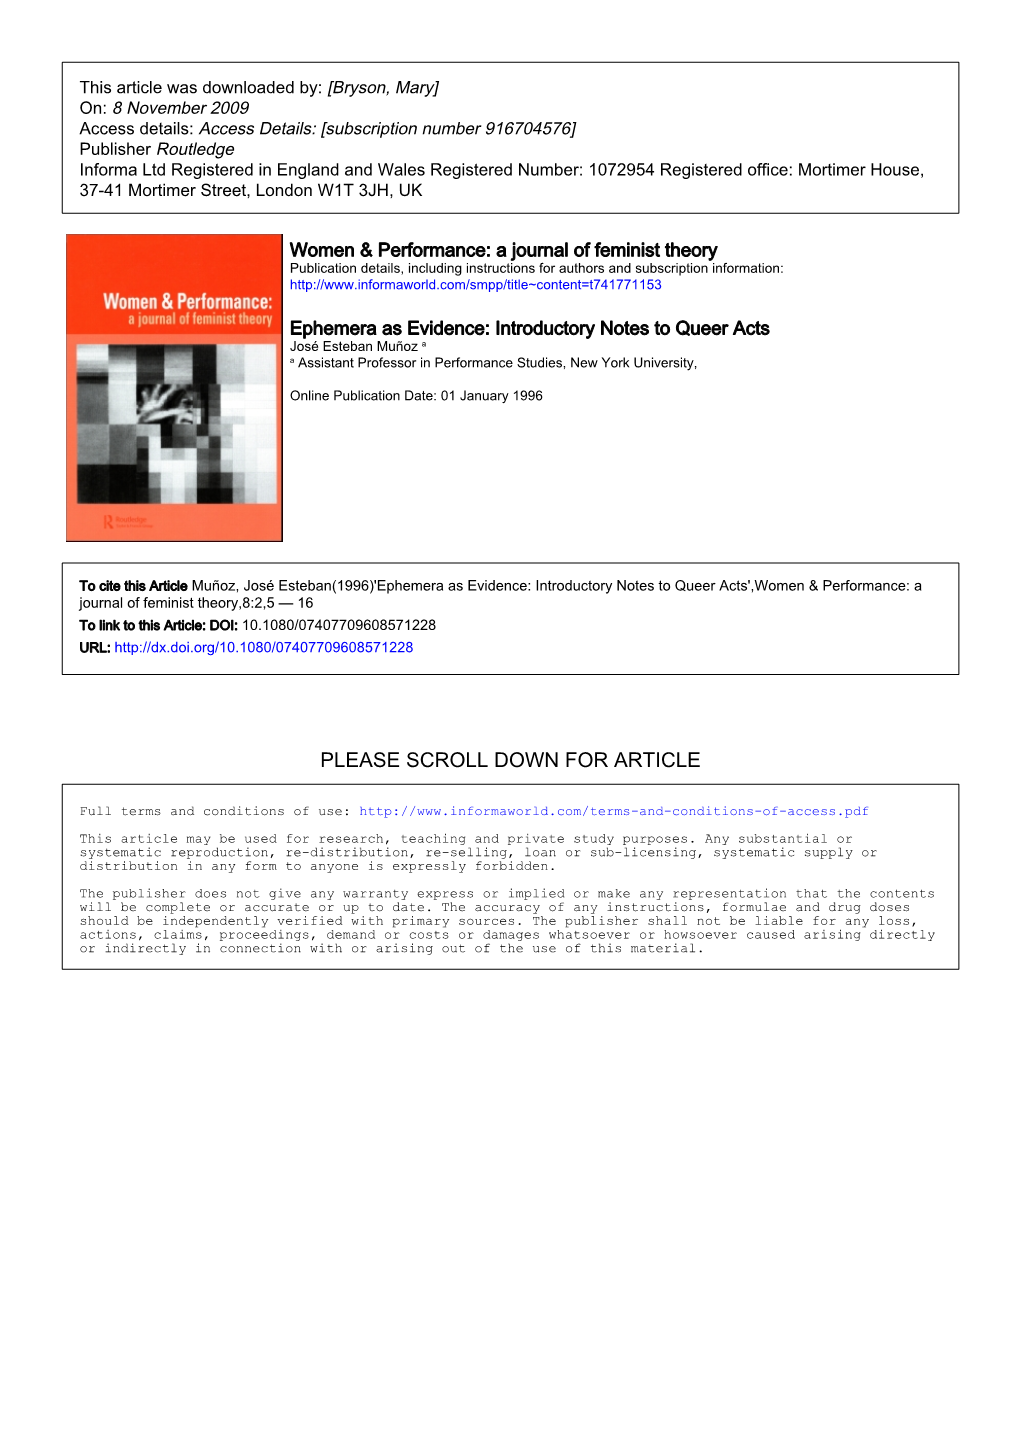 Ephemera As Evidence: Introductory Notes to Queer Acts José Esteban Muñoz a a Assistant Professor in Performance Studies, New York University